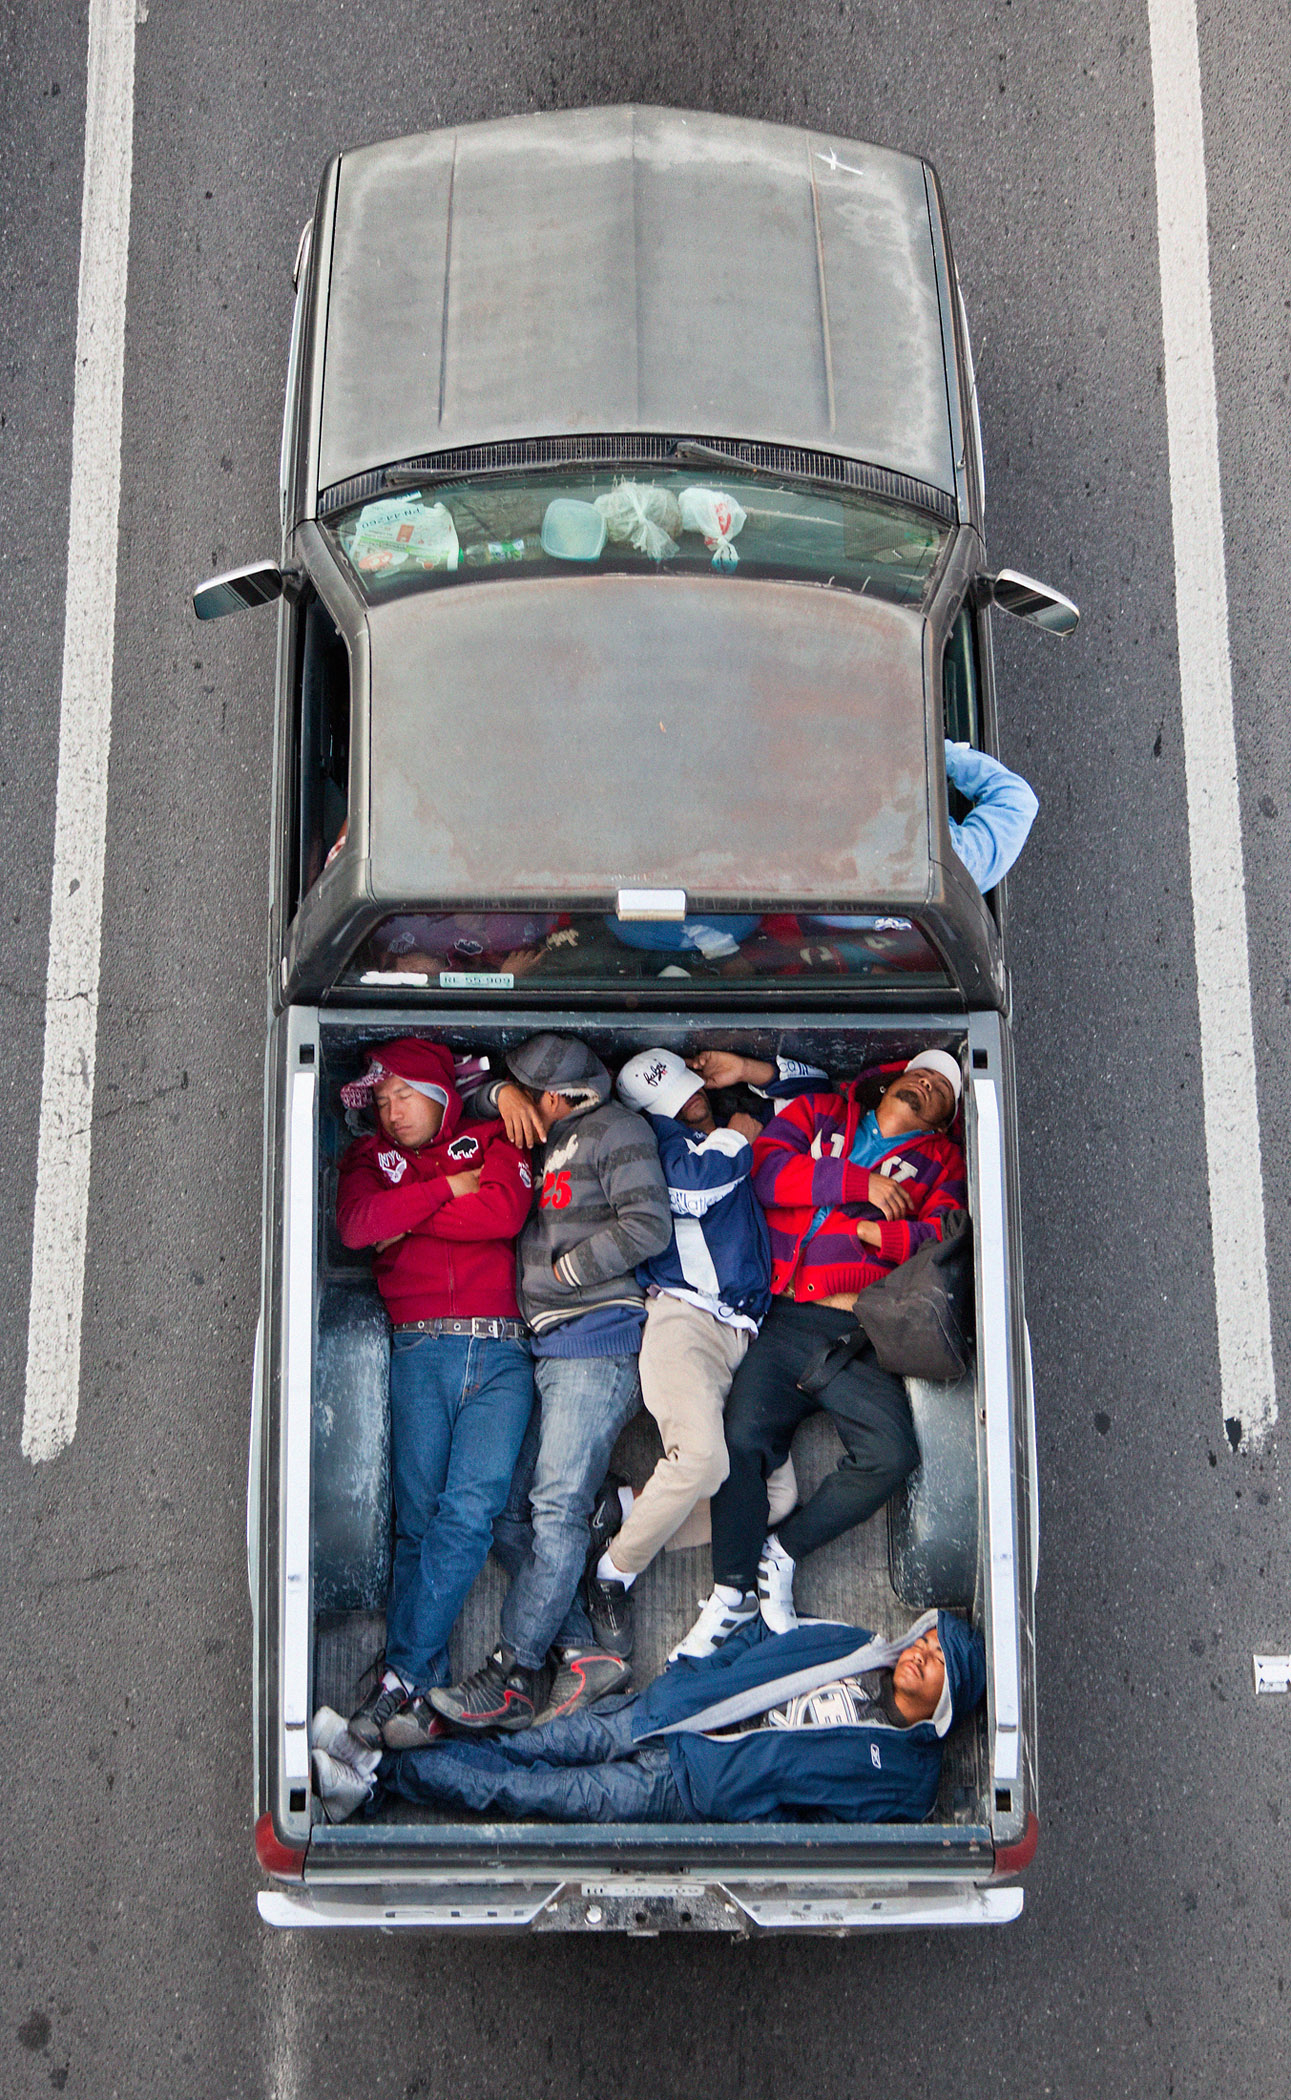     Alejandro Cartagena, Carpoolers, 2011-2012 Courtesy of the artist and Circuit Gallery

